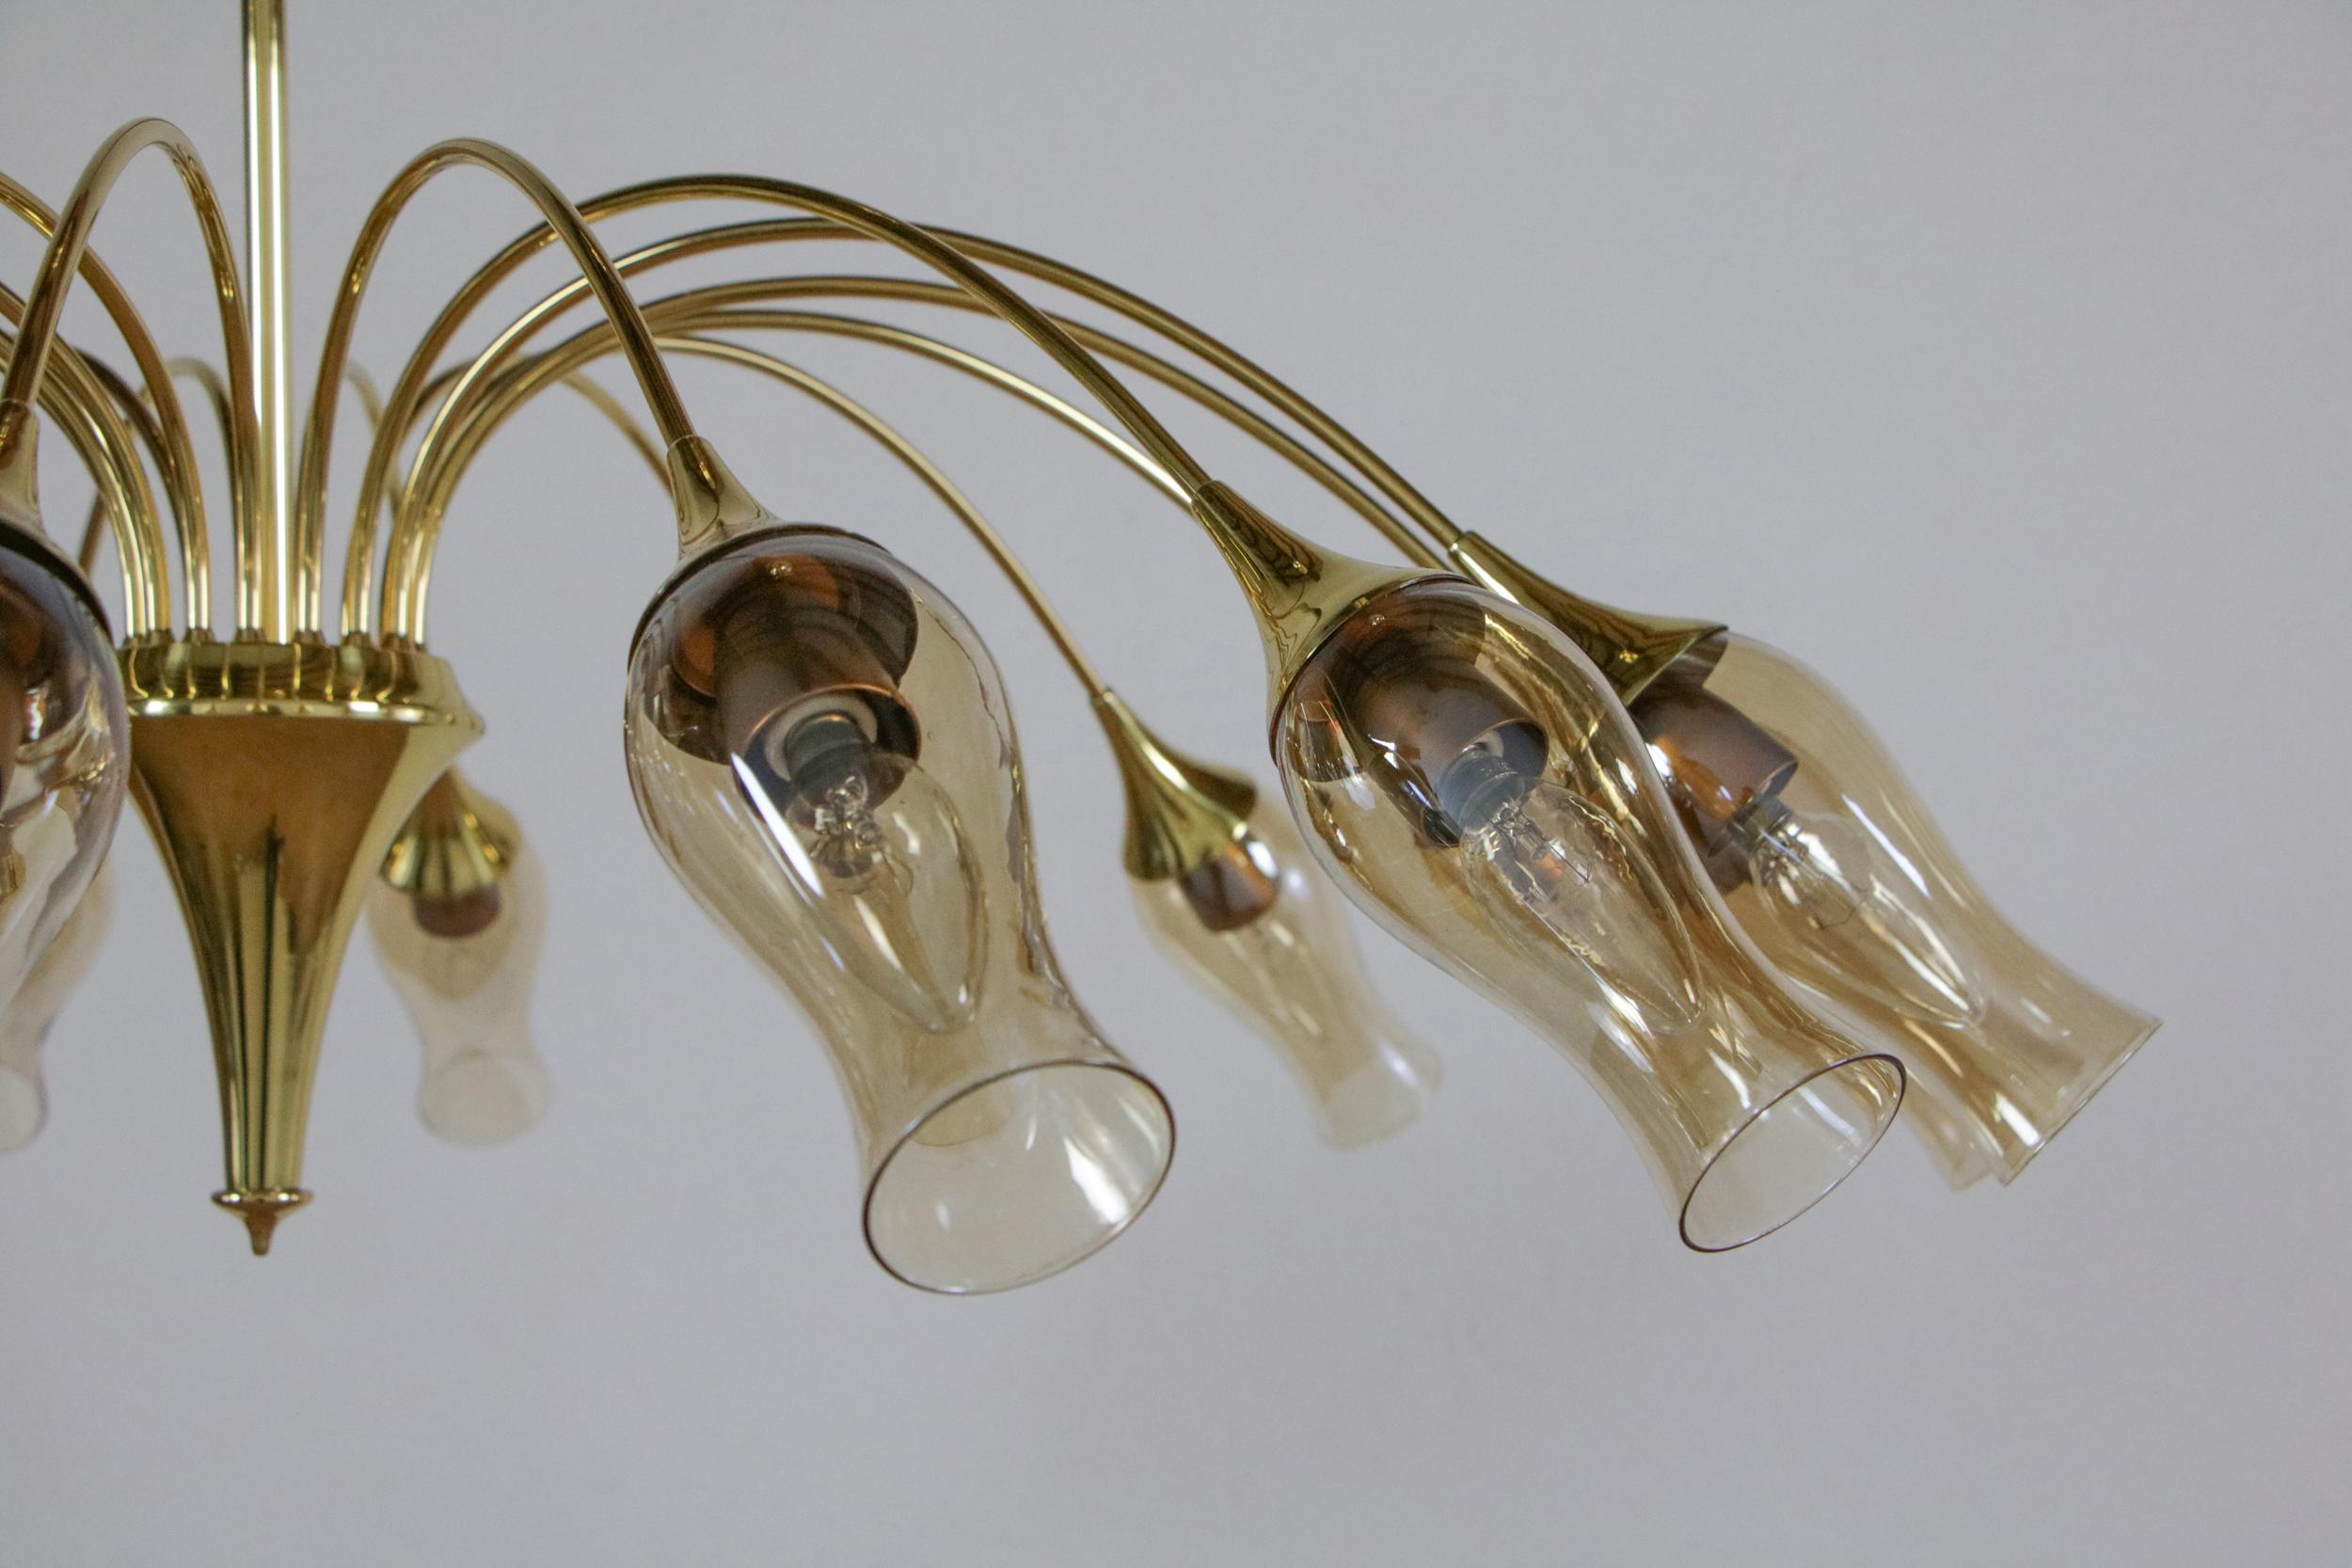 Italian Mid-Century Modern Big Spider Murano Glass Chandelier, Gold Color, 1950s For Sale 3